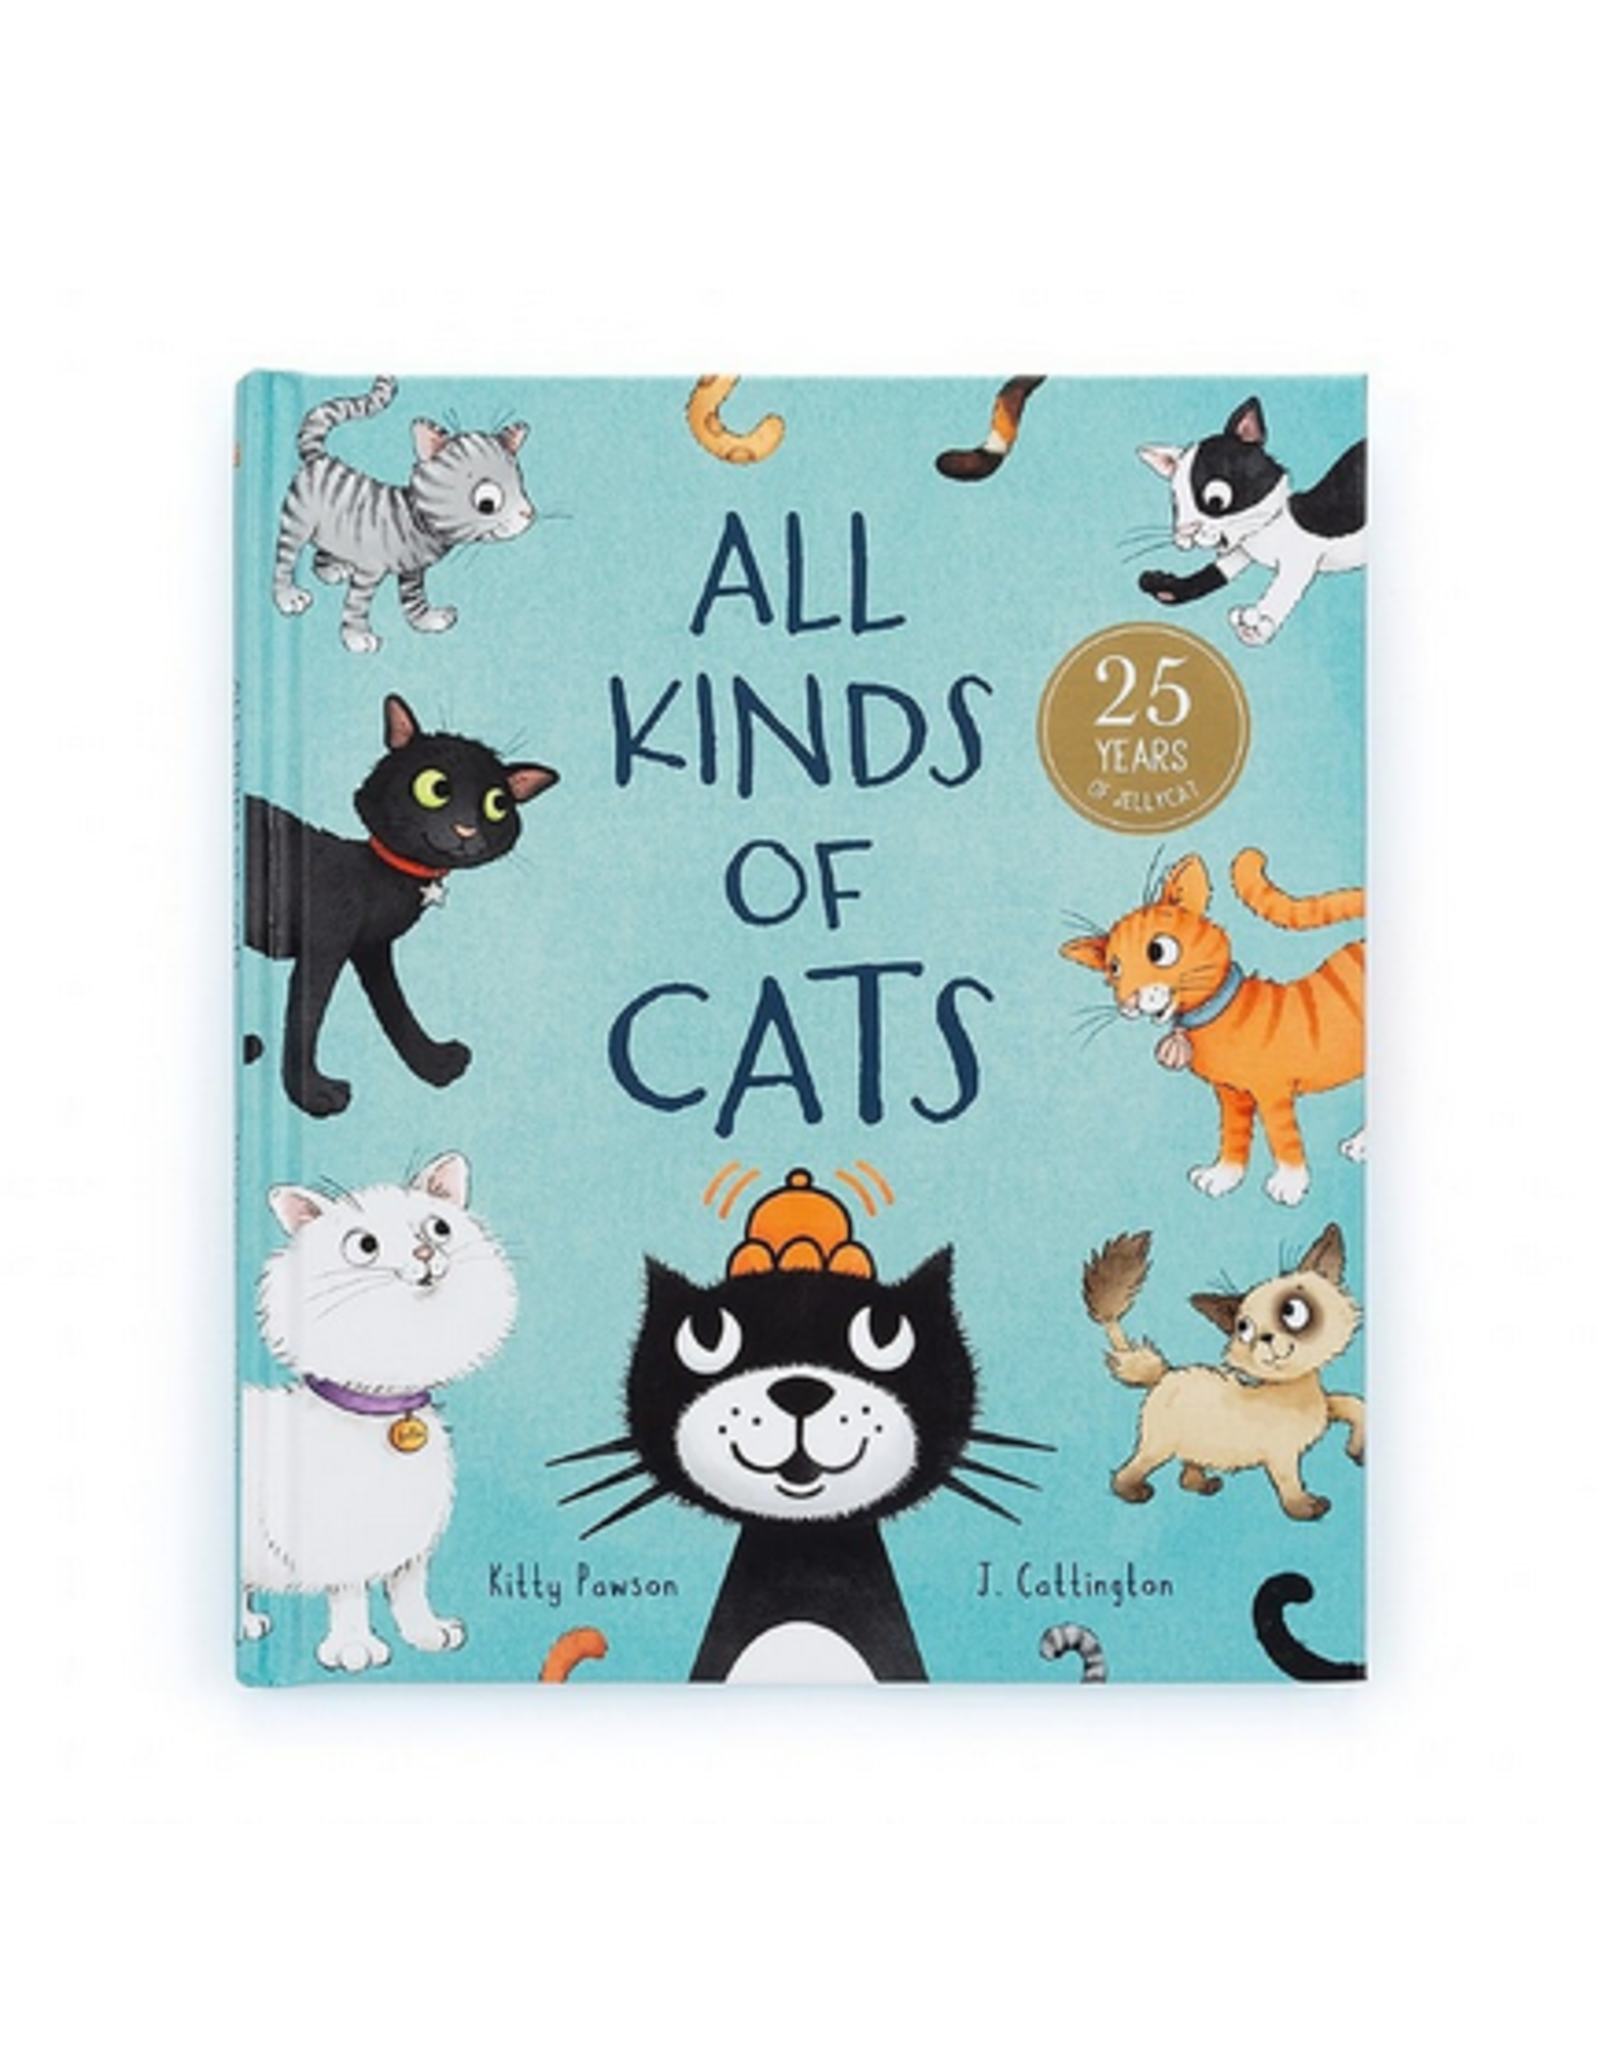 jellycat Jellycat All Kinds of Cats Book